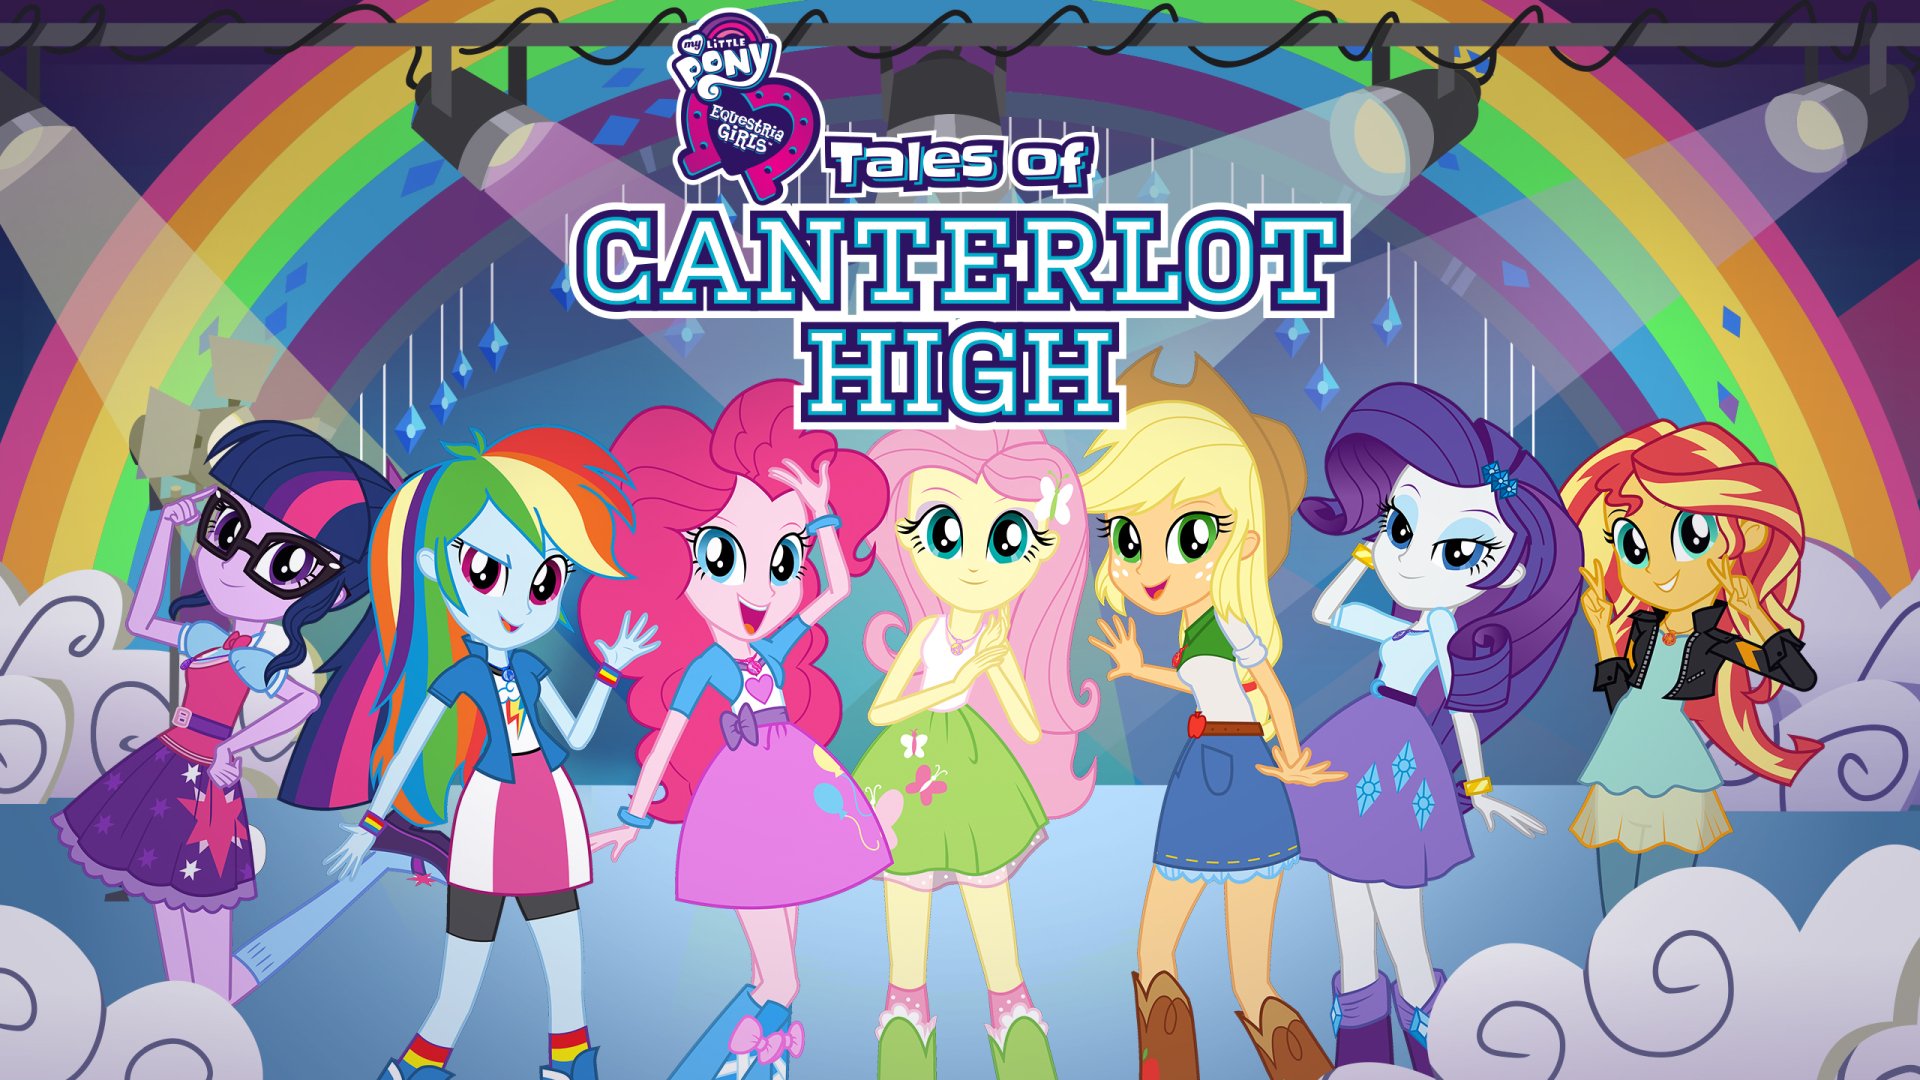 Download Sunset Shimmer Rarity (My Little Pony) Applejack (My Little Pony) Fluttershy (My Little Pony) Pinkie Pie Rainbow Dash Sci-Twi (My Little Pony) TV Show My Little Pony: Equestria Girls - Tales Of Canterlot High  HD Wallpaper